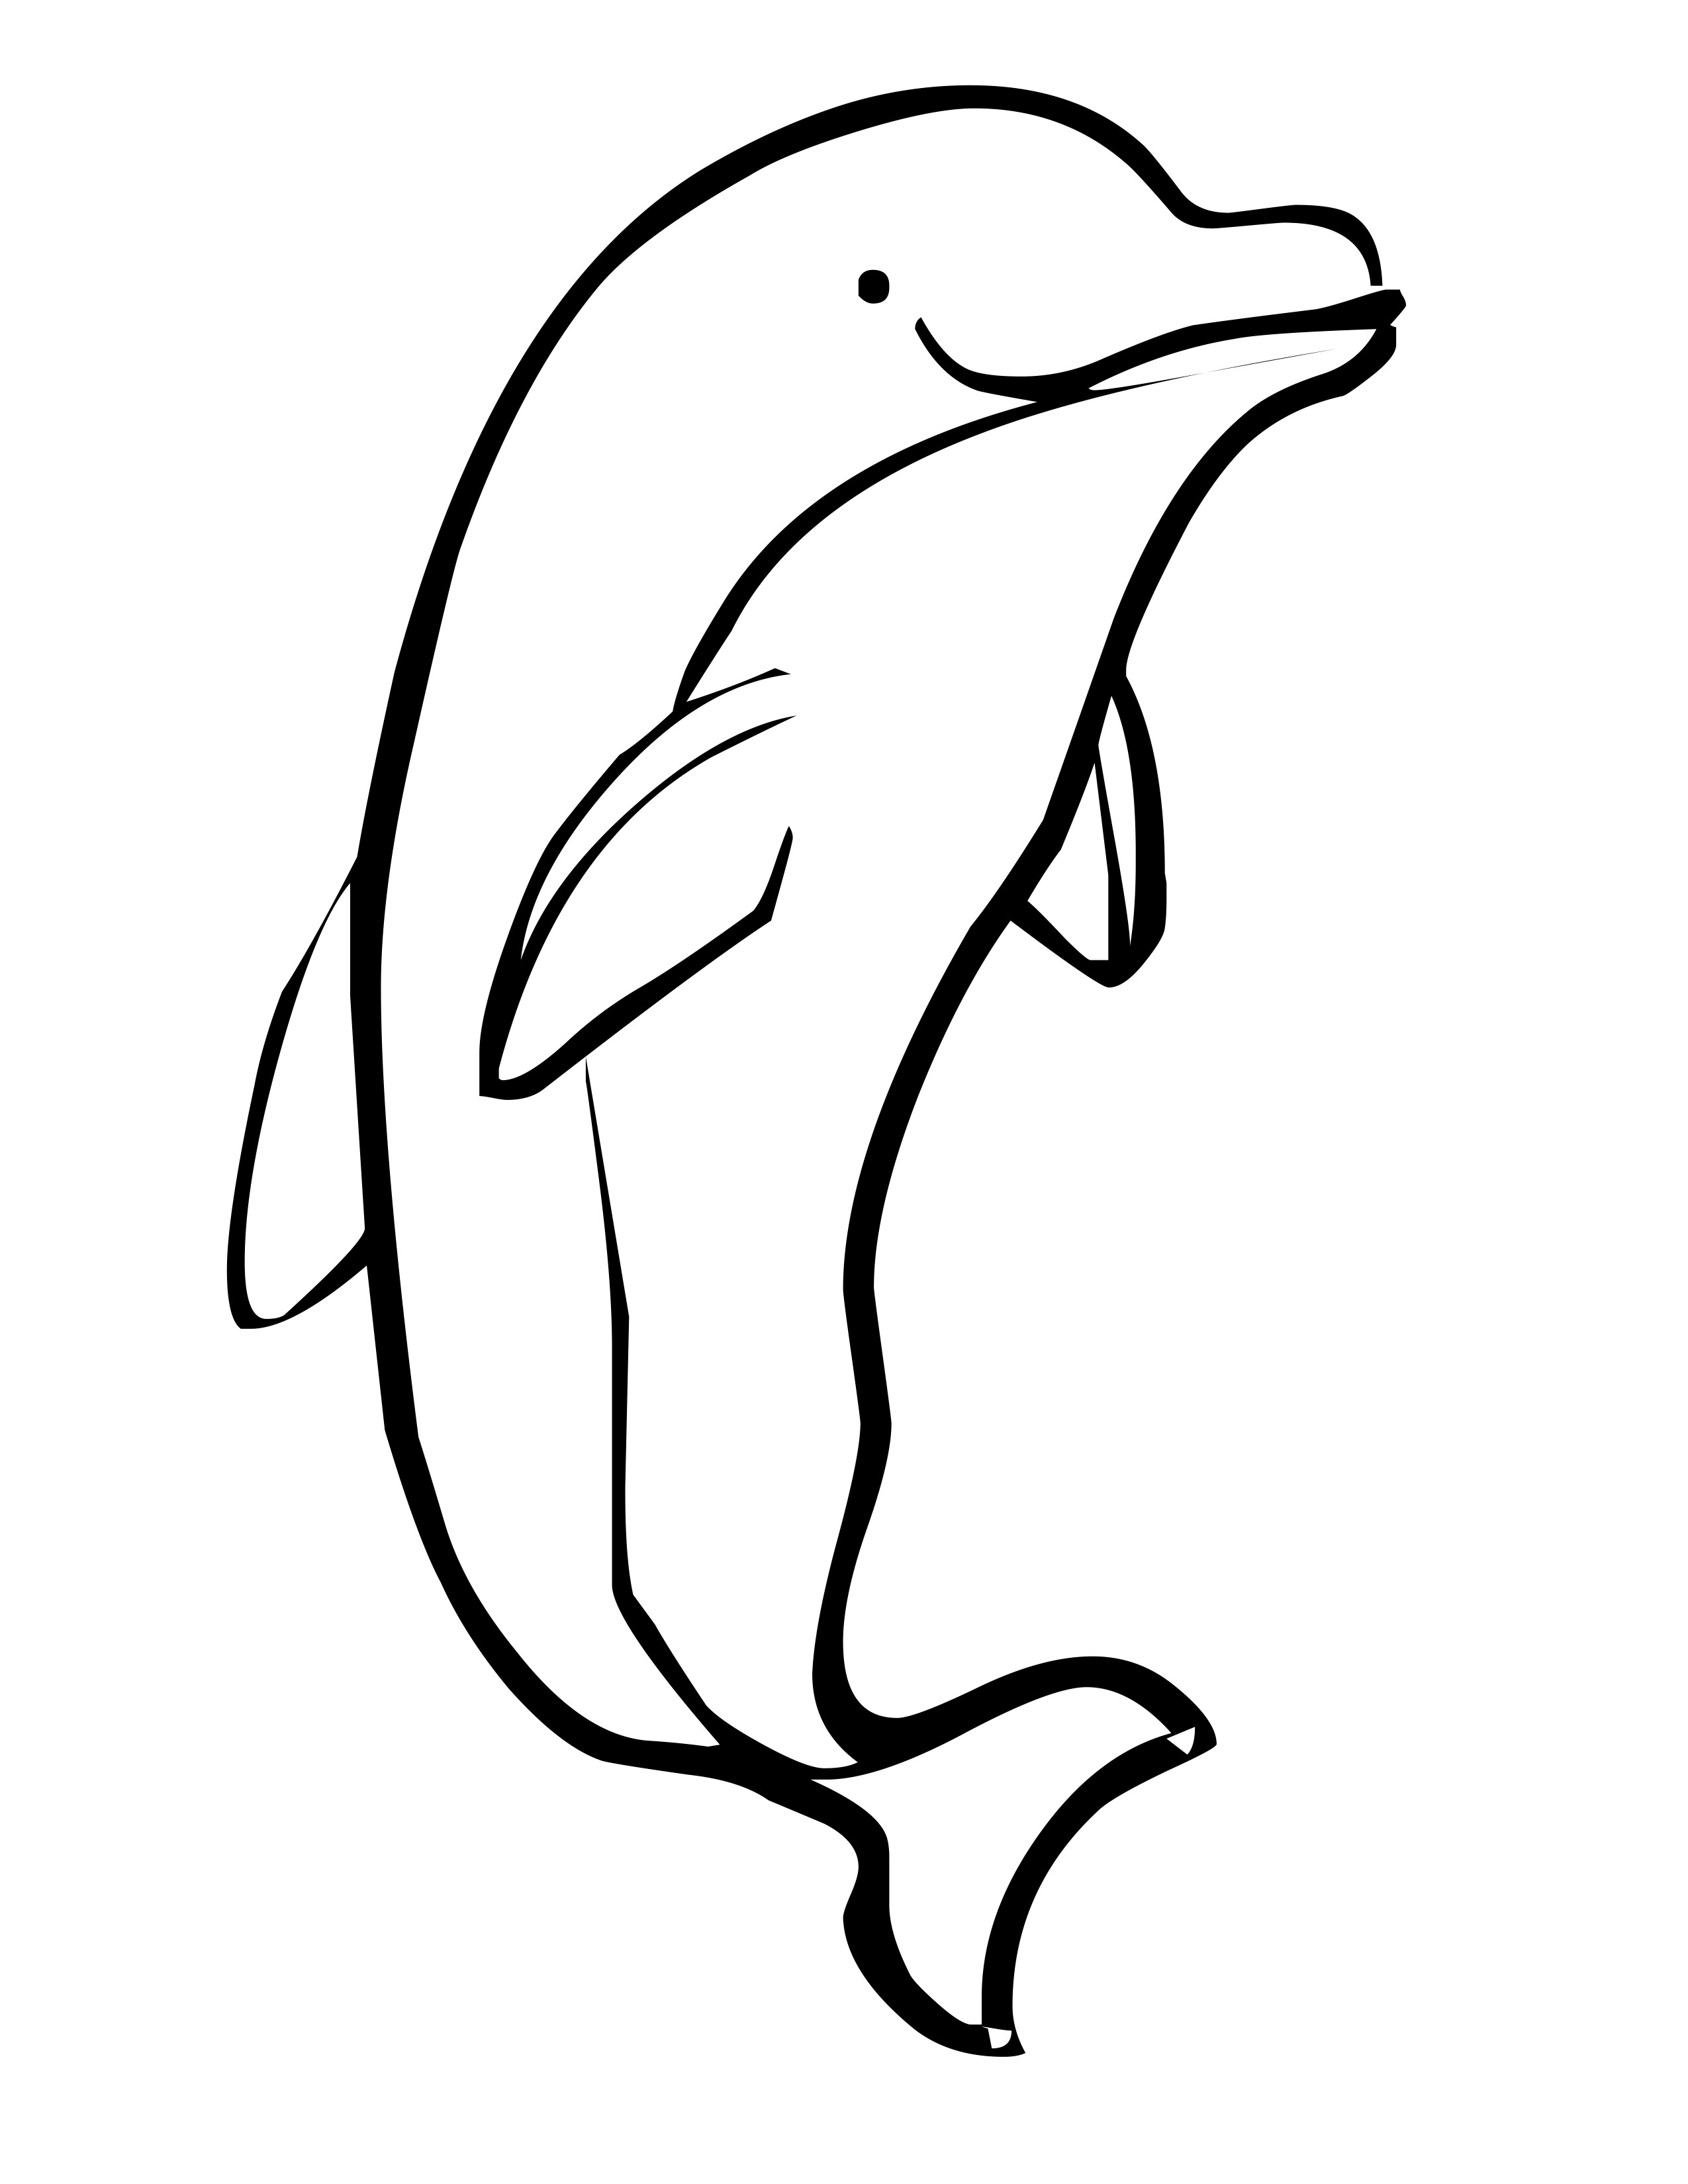 Cute Dolphin Coloring Pages at GetDrawings Free download